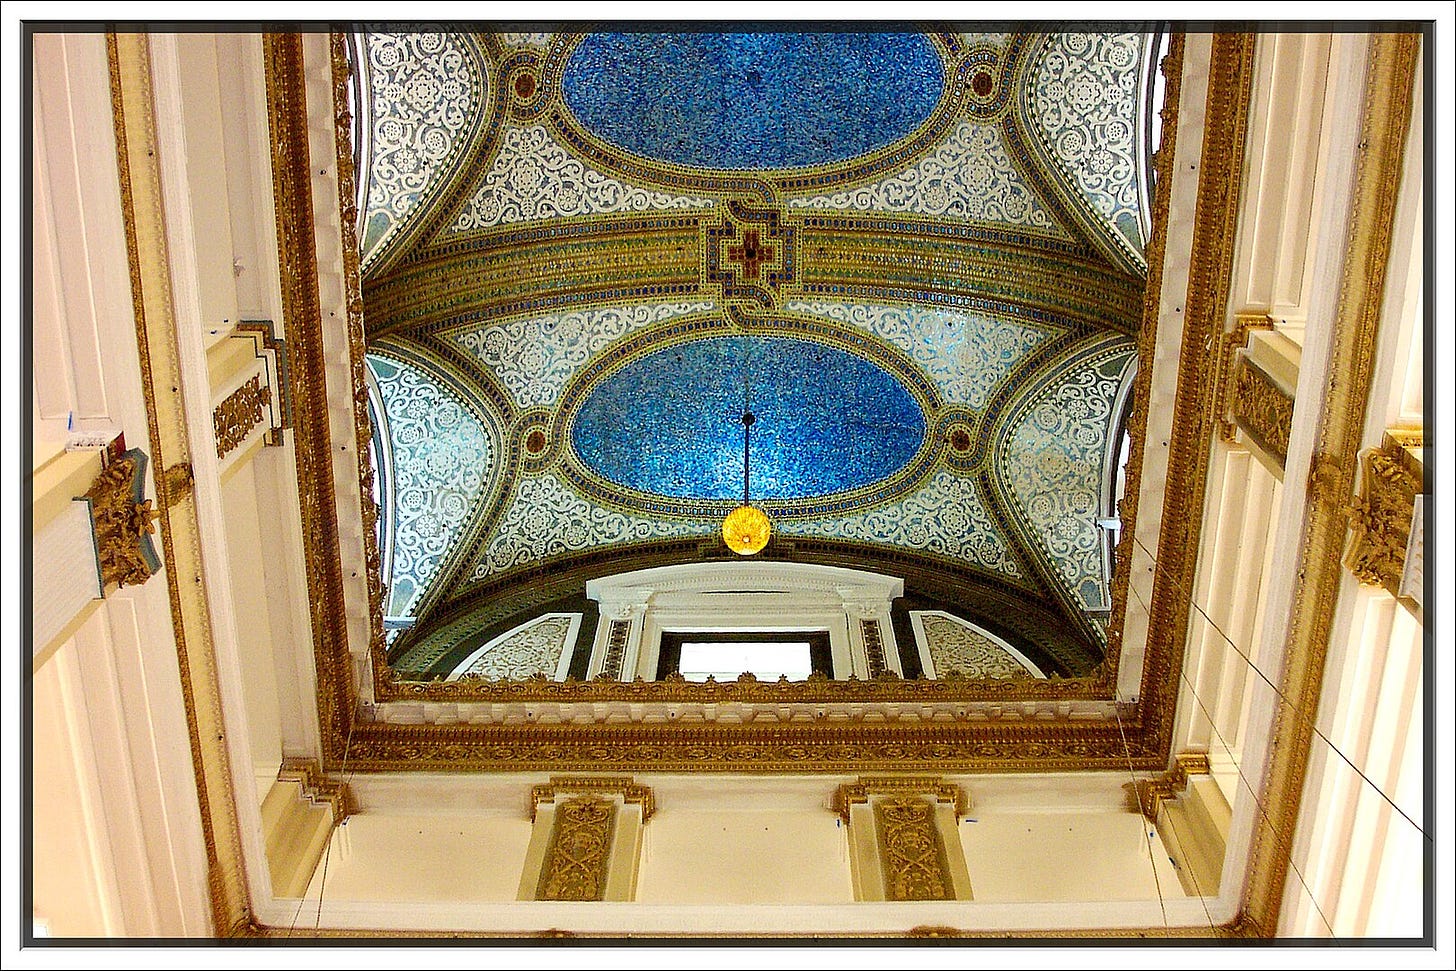 The Tiffany mosaic ceiling at Marshall Field's in Chicago.